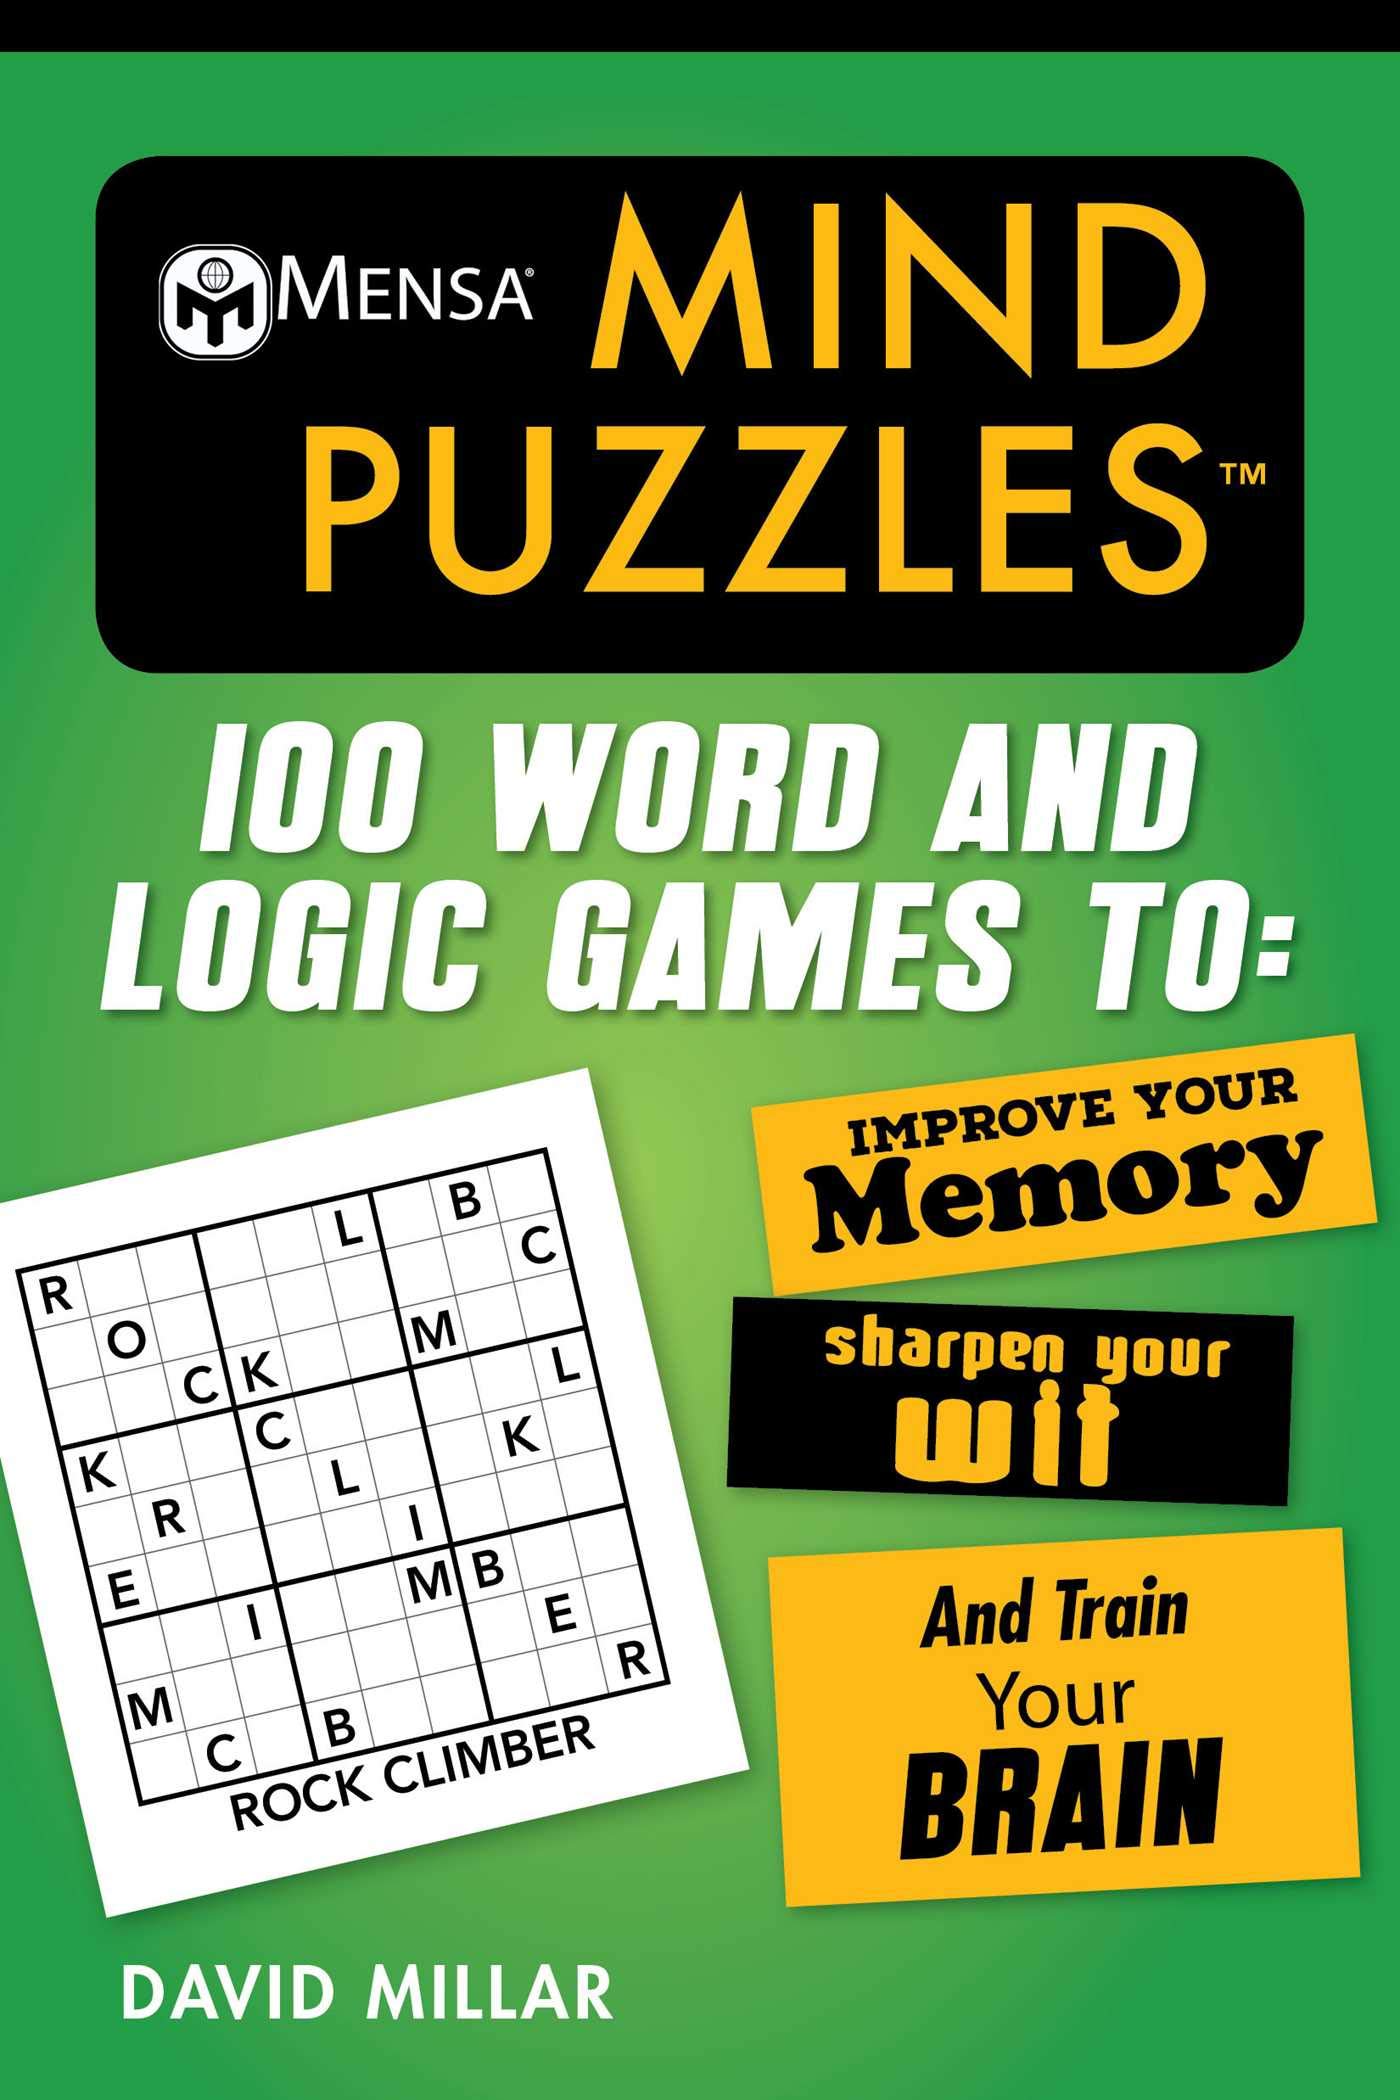 Cover of Mensa Mind Puzzles by David Millar